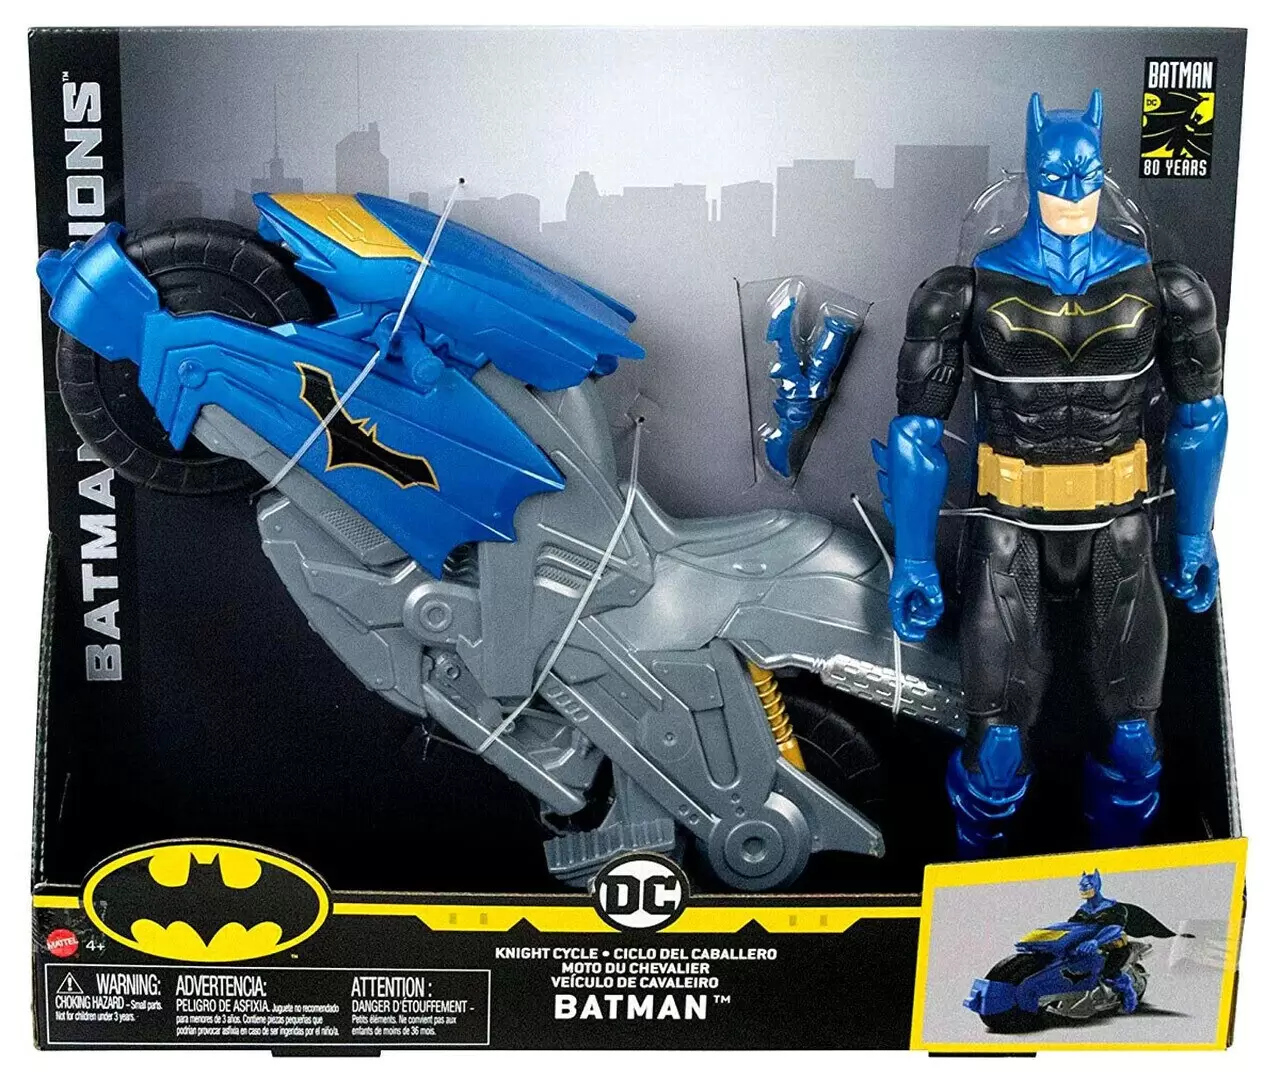 Knight Cycle True Moves - Batman Missions action figure